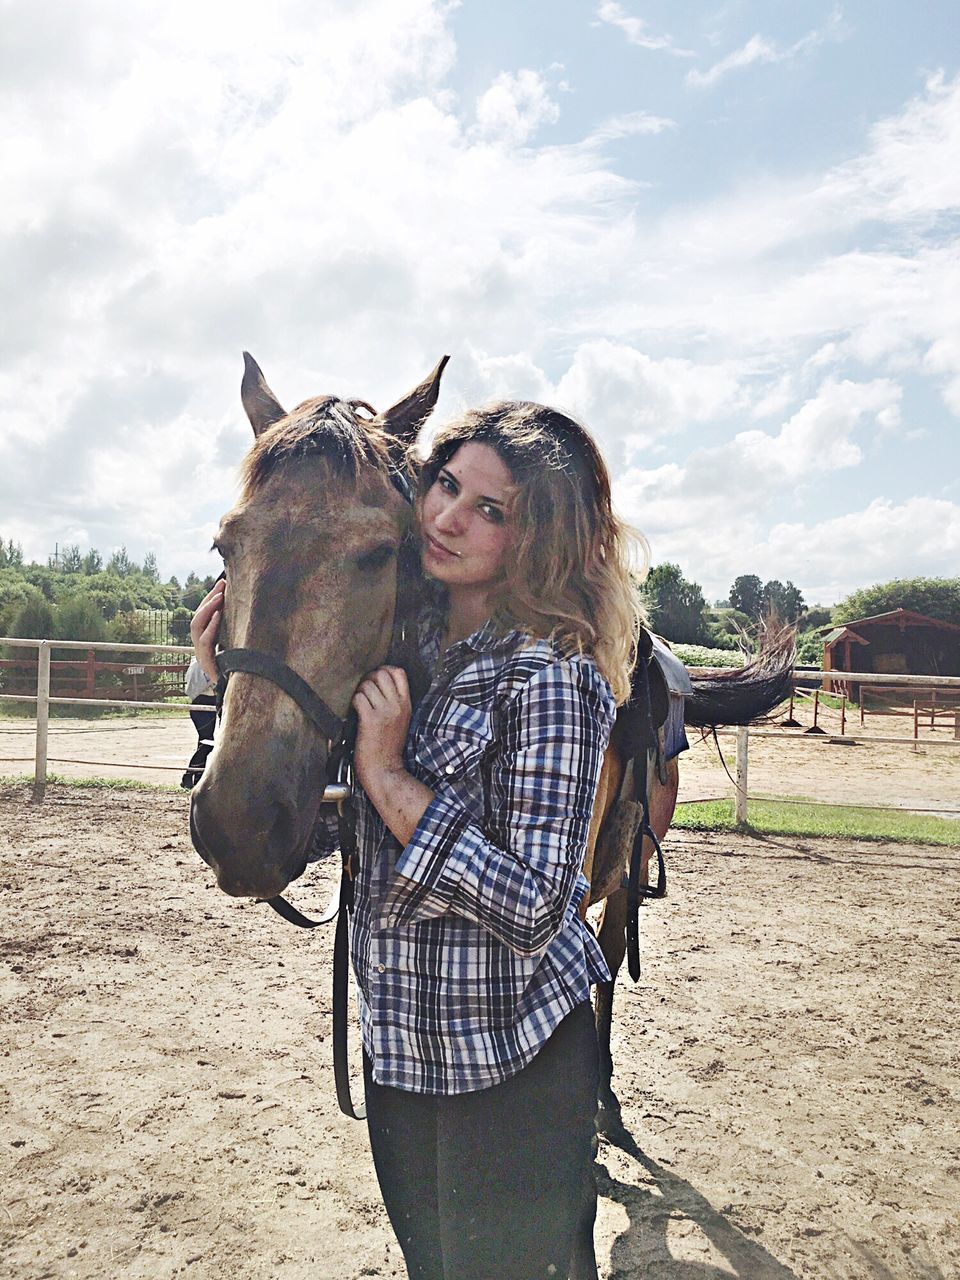 horse, domestic animals, one animal, animal themes, livestock, mammal, leisure activity, casual clothing, day, young women, lifestyles, standing, front view, real people, happiness, young adult, one person, sky, outdoors, bonding, smiling, pets, nature, blond hair, adult, people, adults only